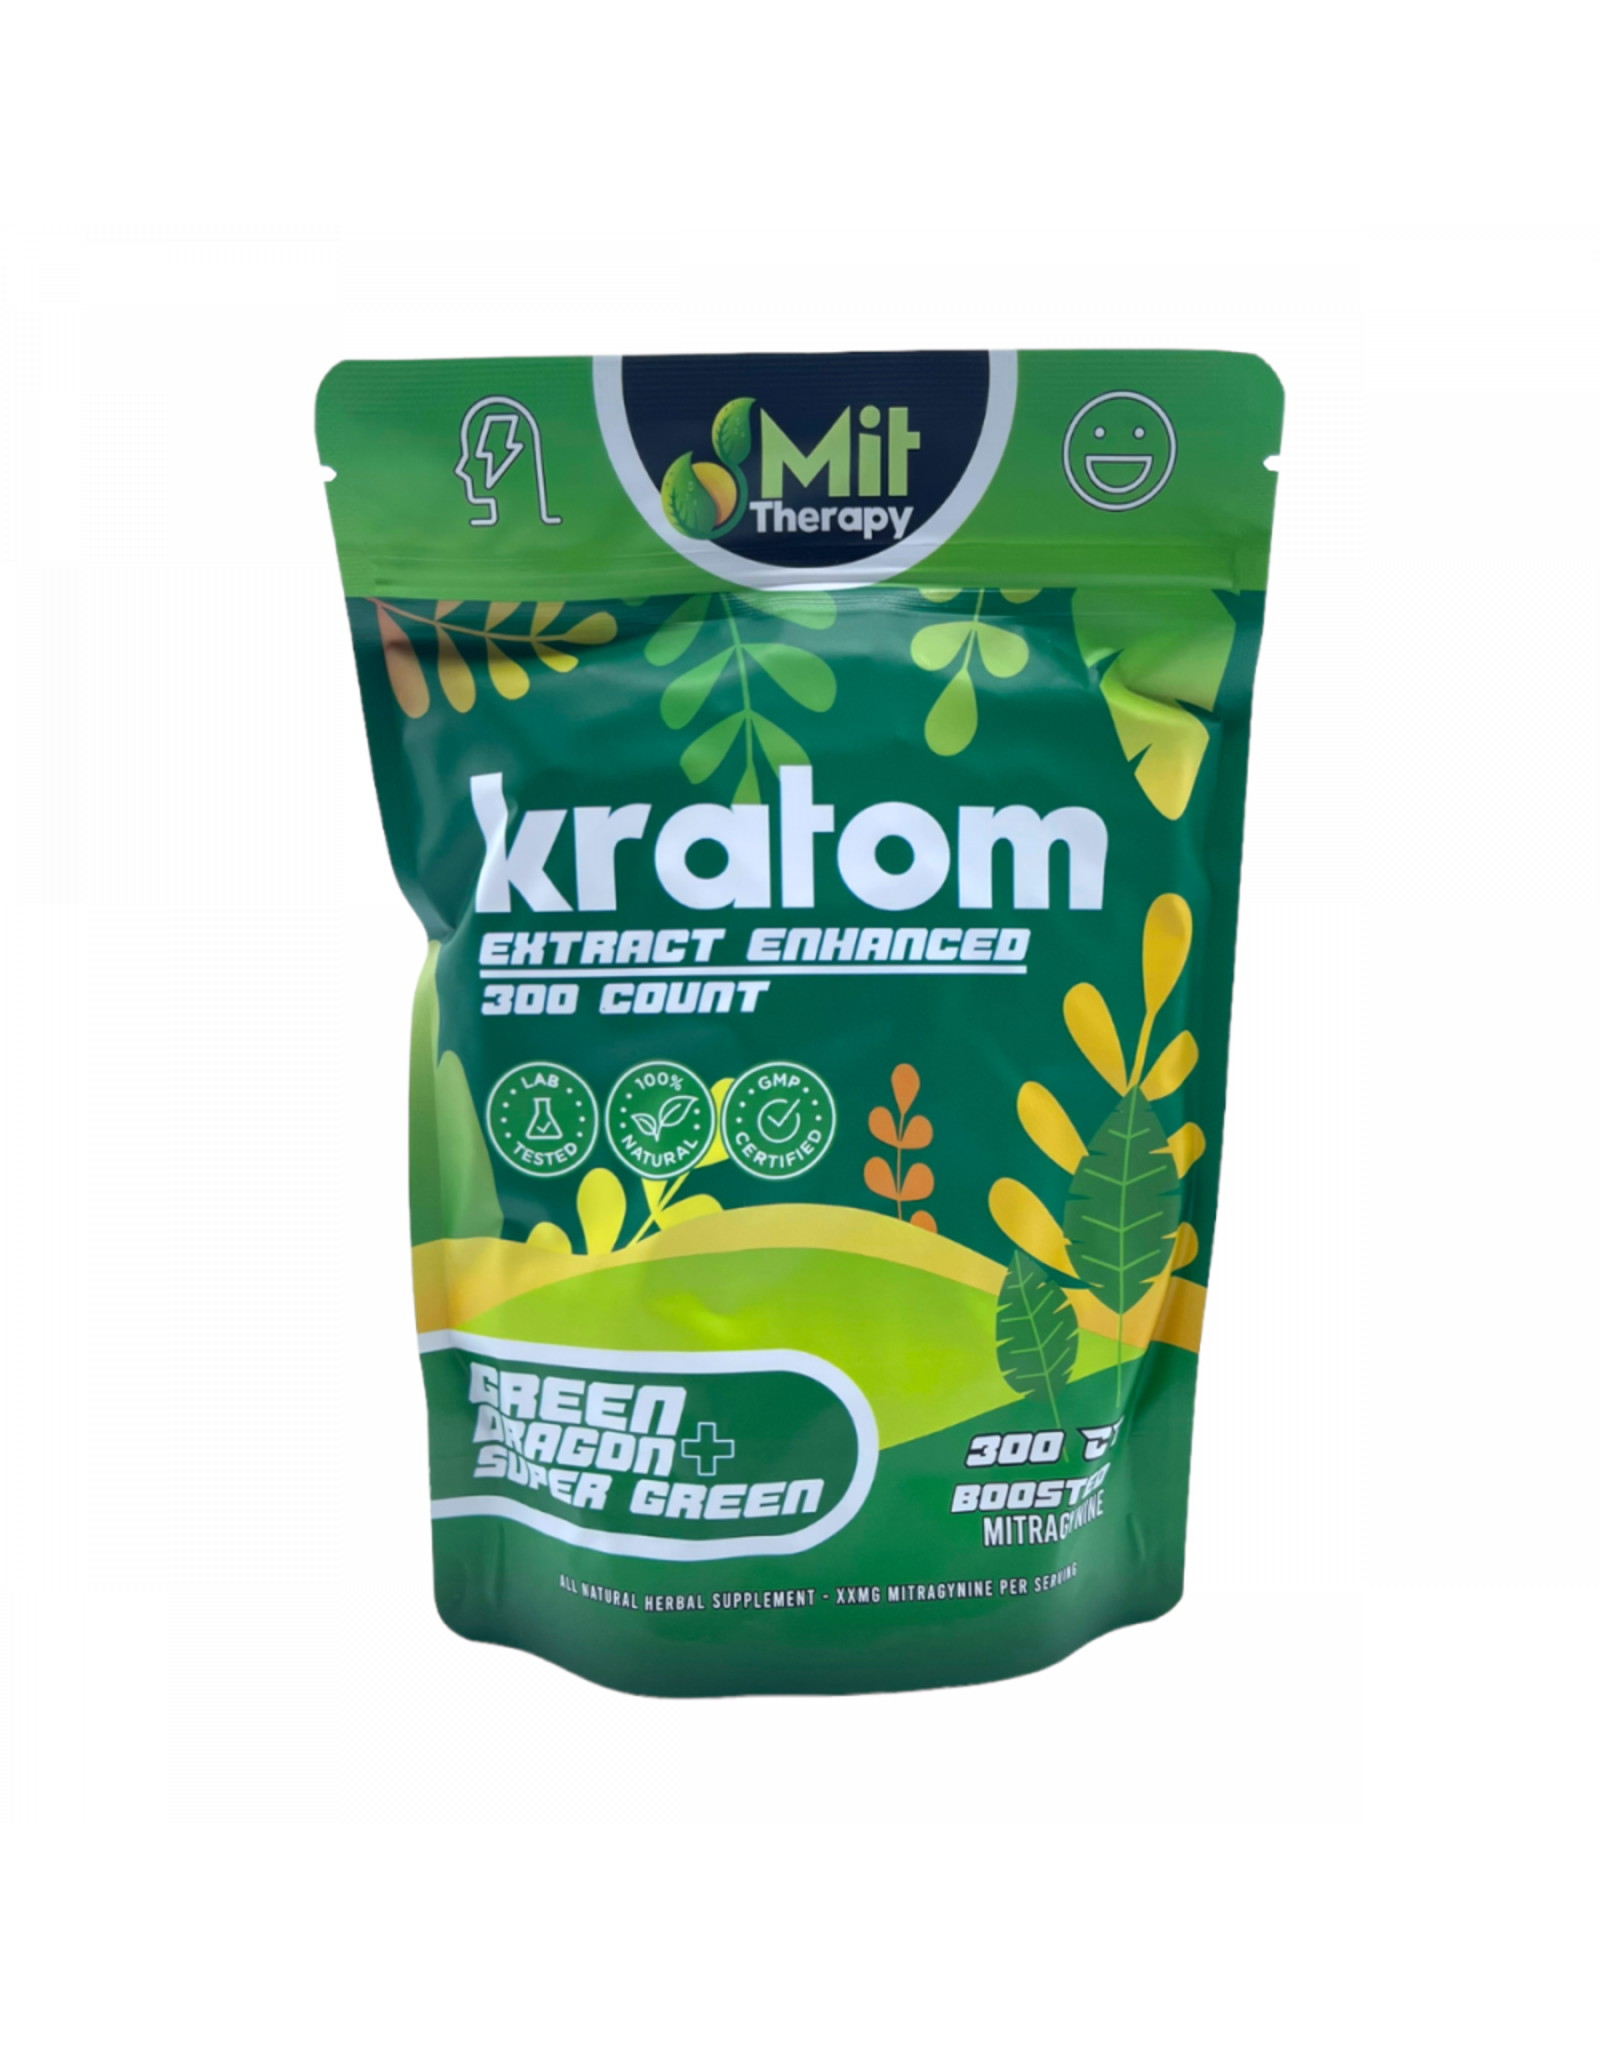 MIT Therapy MIT Therapy Kratom Green Dragon + Super Green 10ct